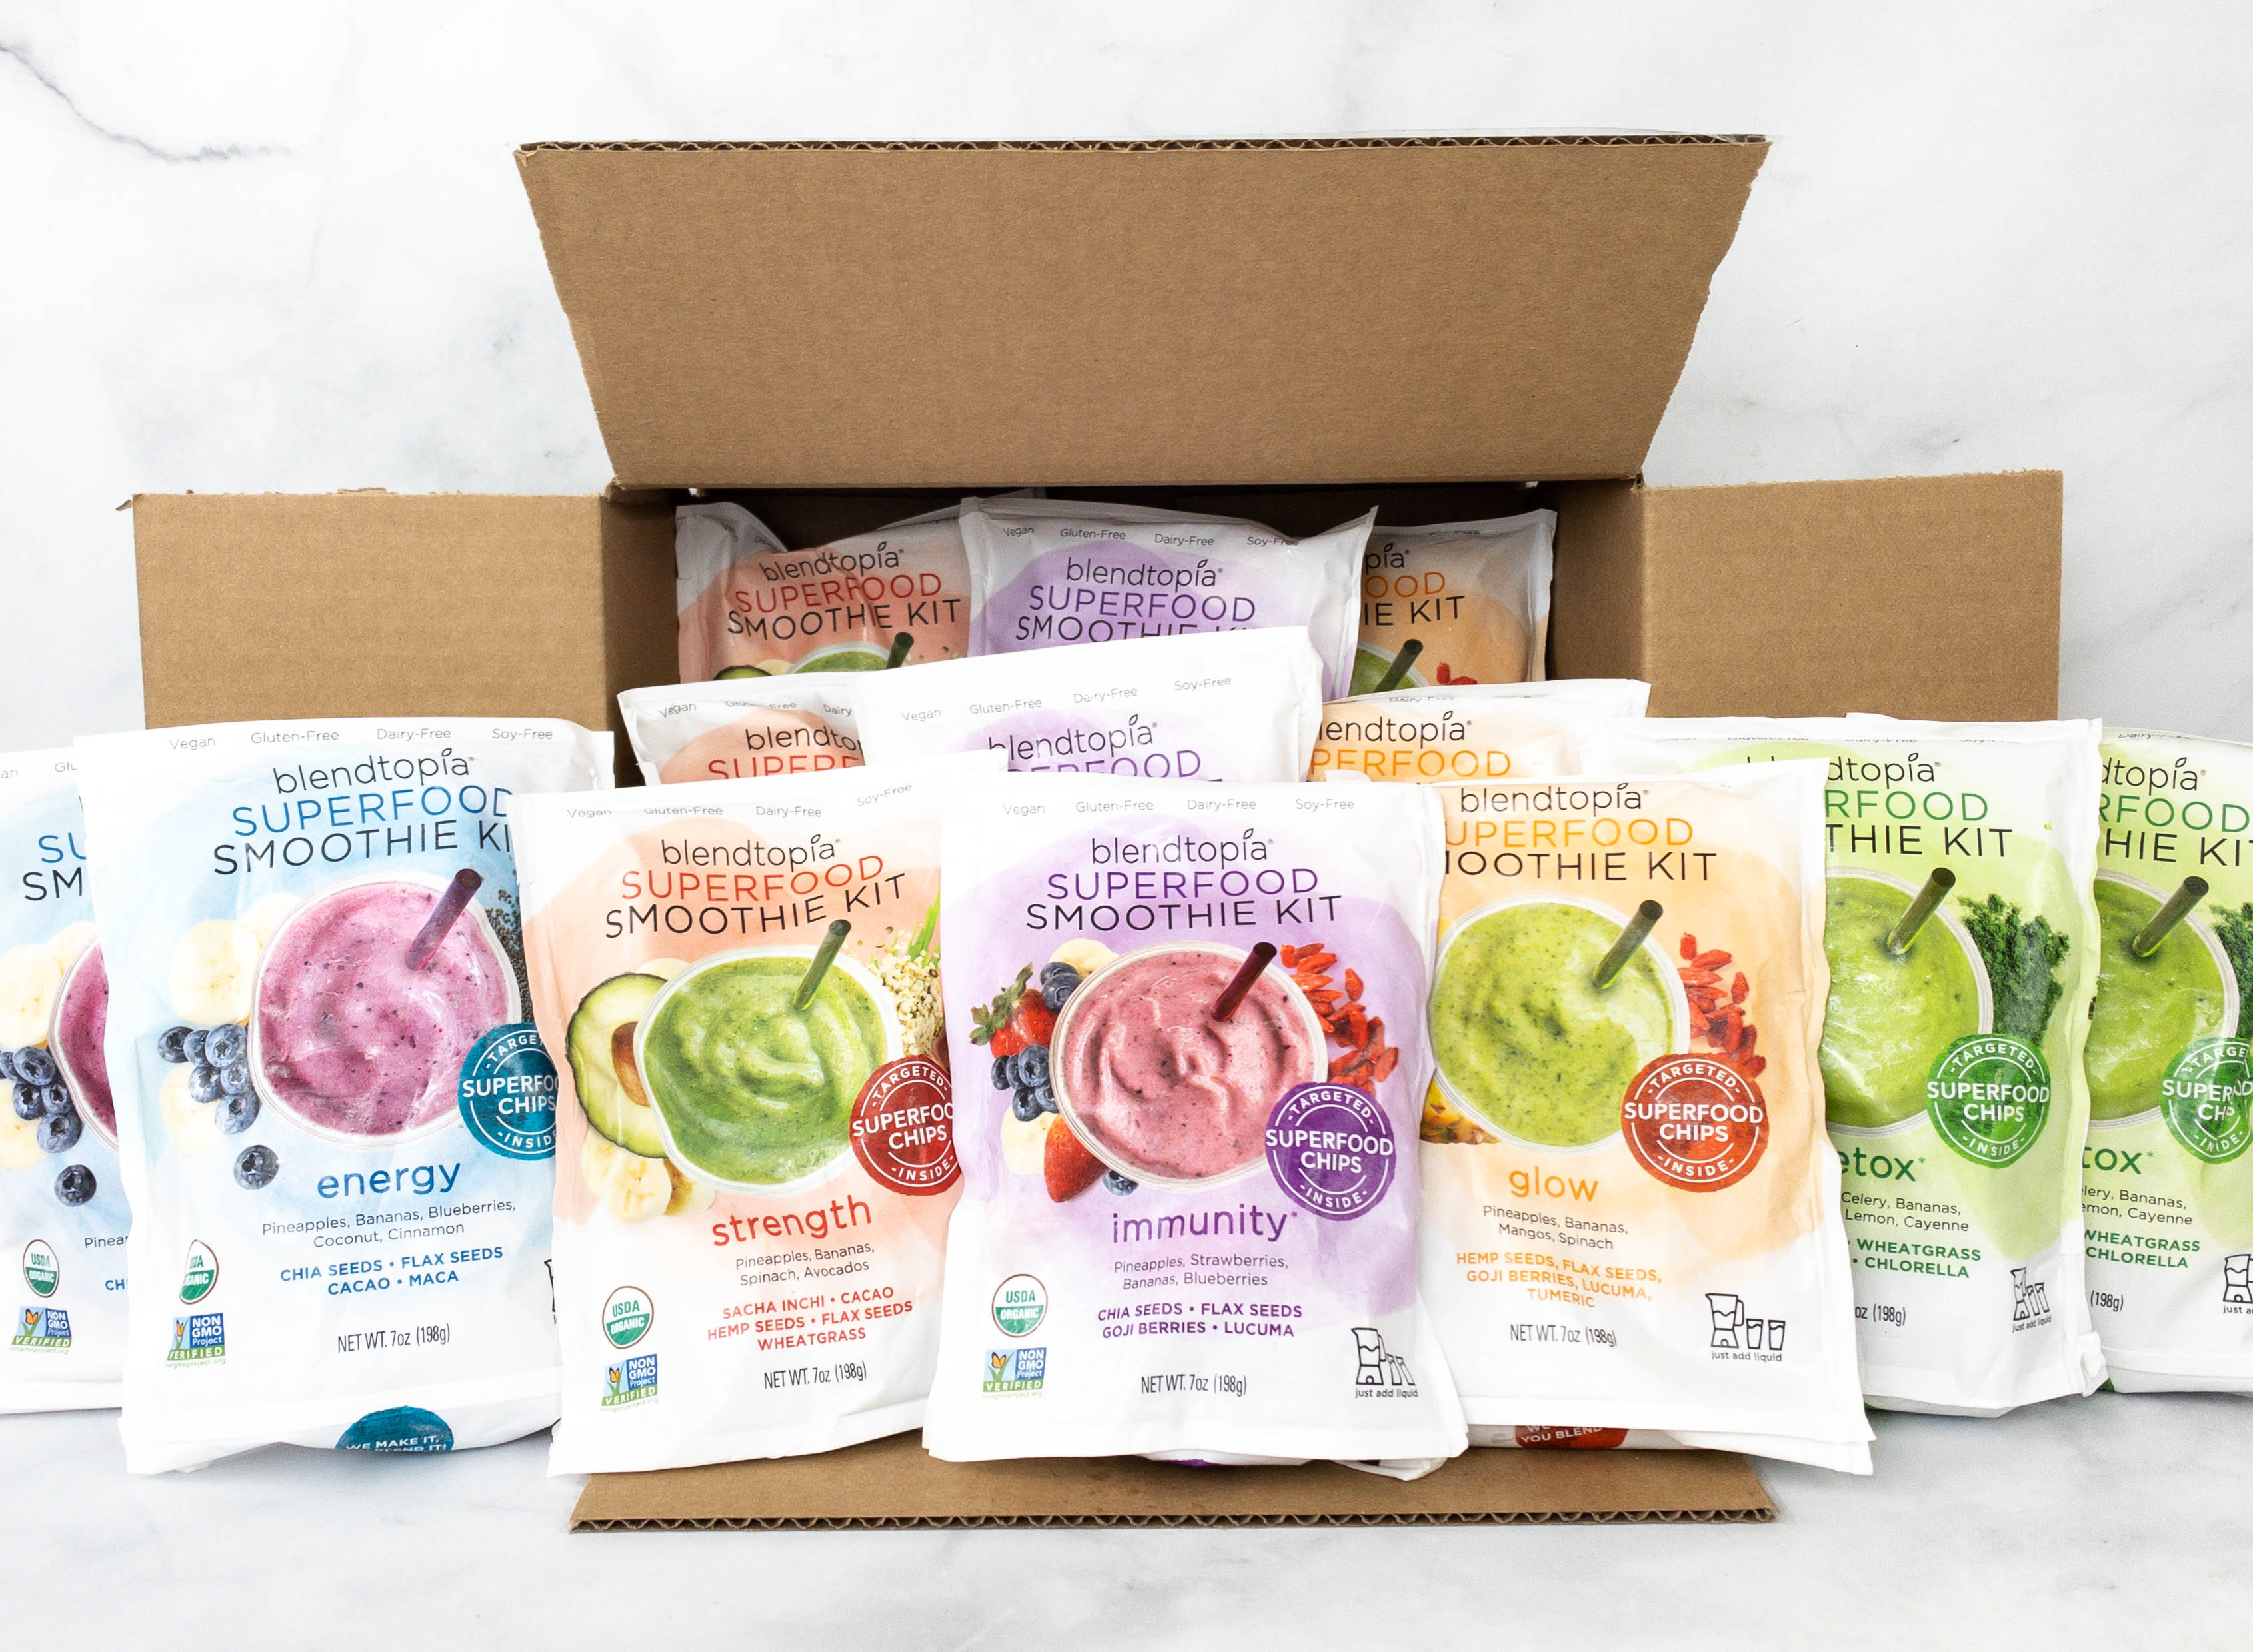 Blendtopia Superfood Smoothie Kit Review + Coupon! - Hello Subscription